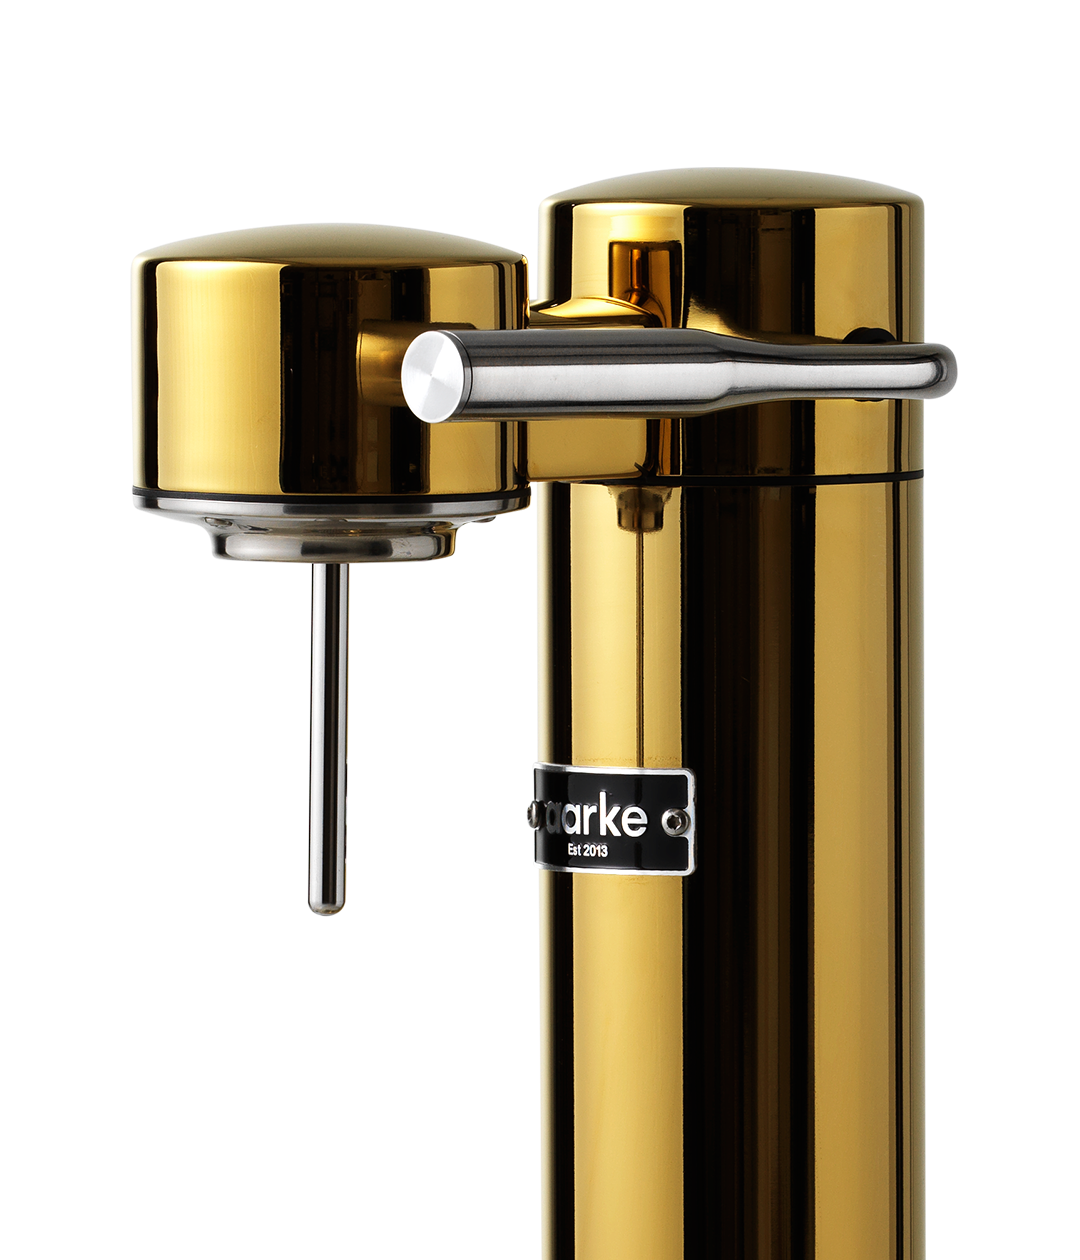 Aarke Carbonator 3 in Gold. Nozzle close up.